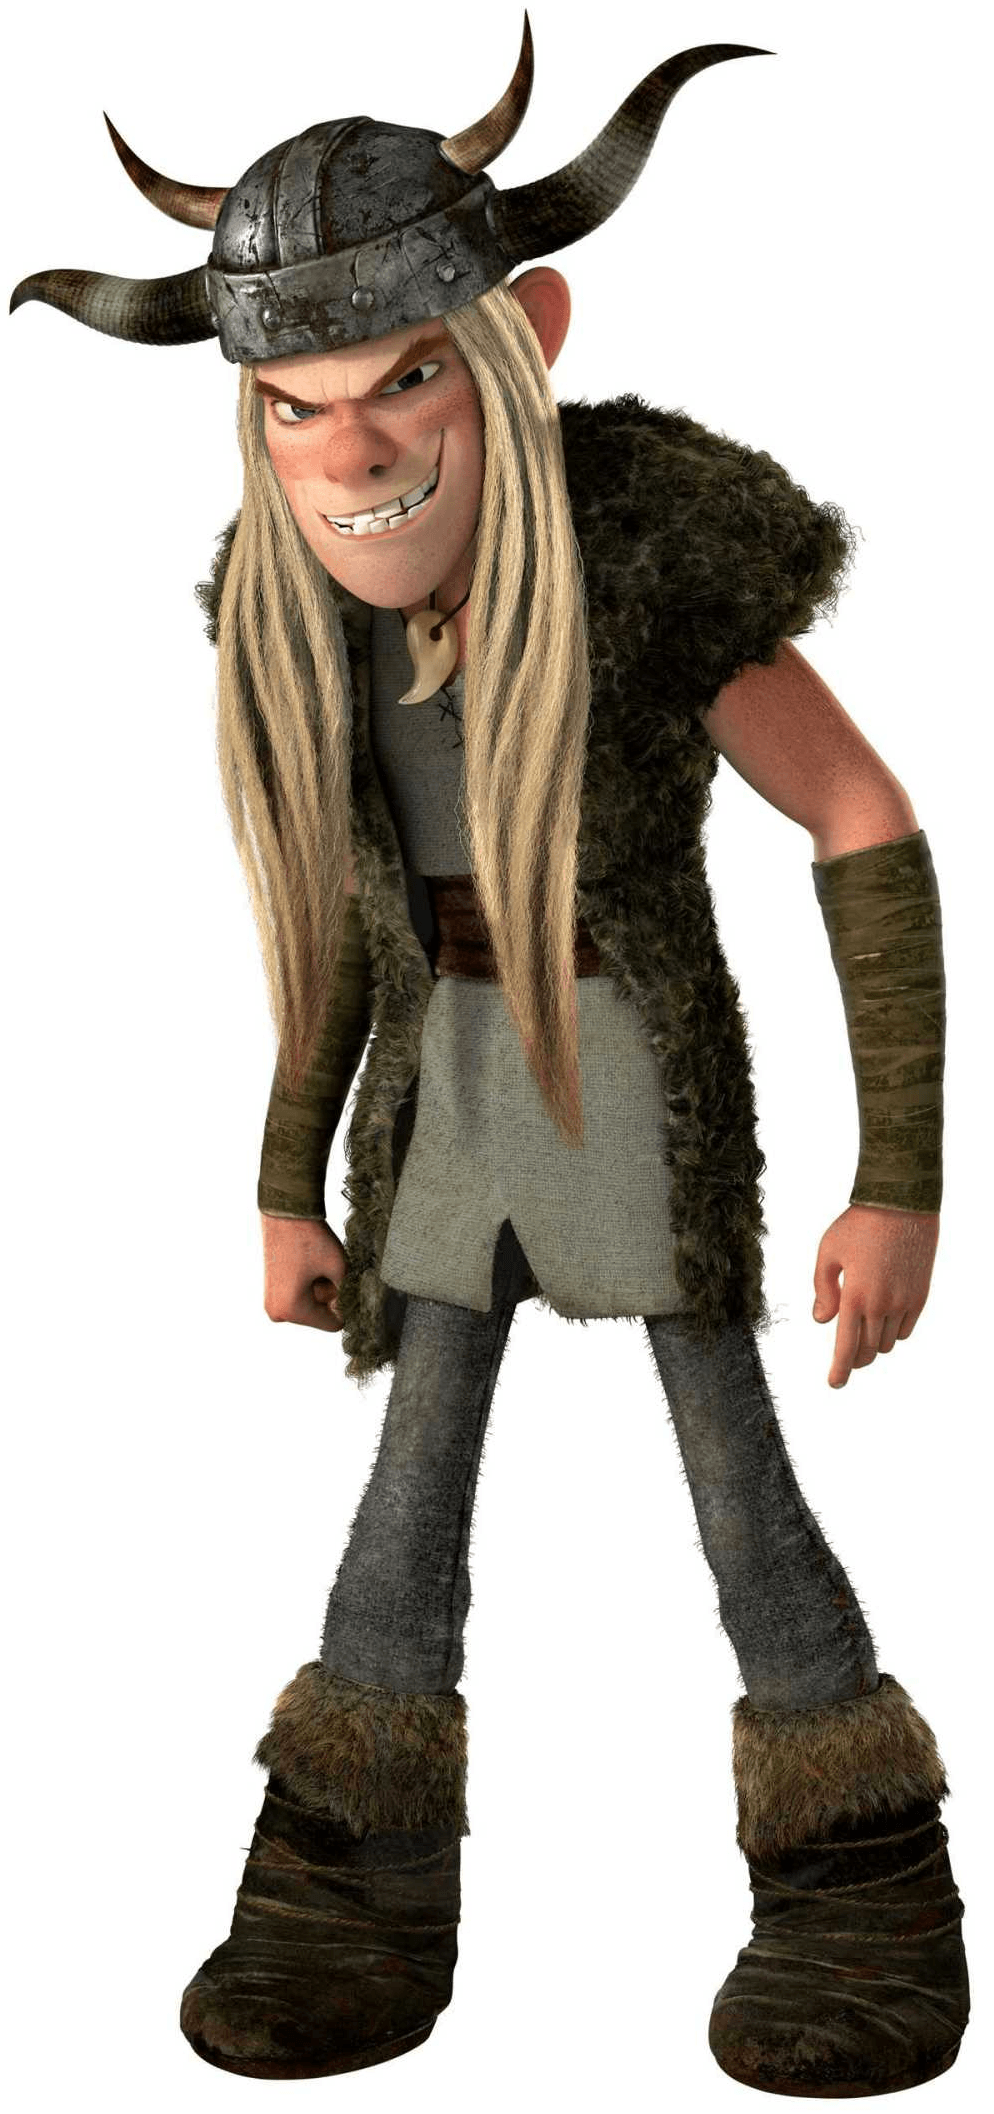 How to Train Your Dragon Thorston (T.J. Miller) is